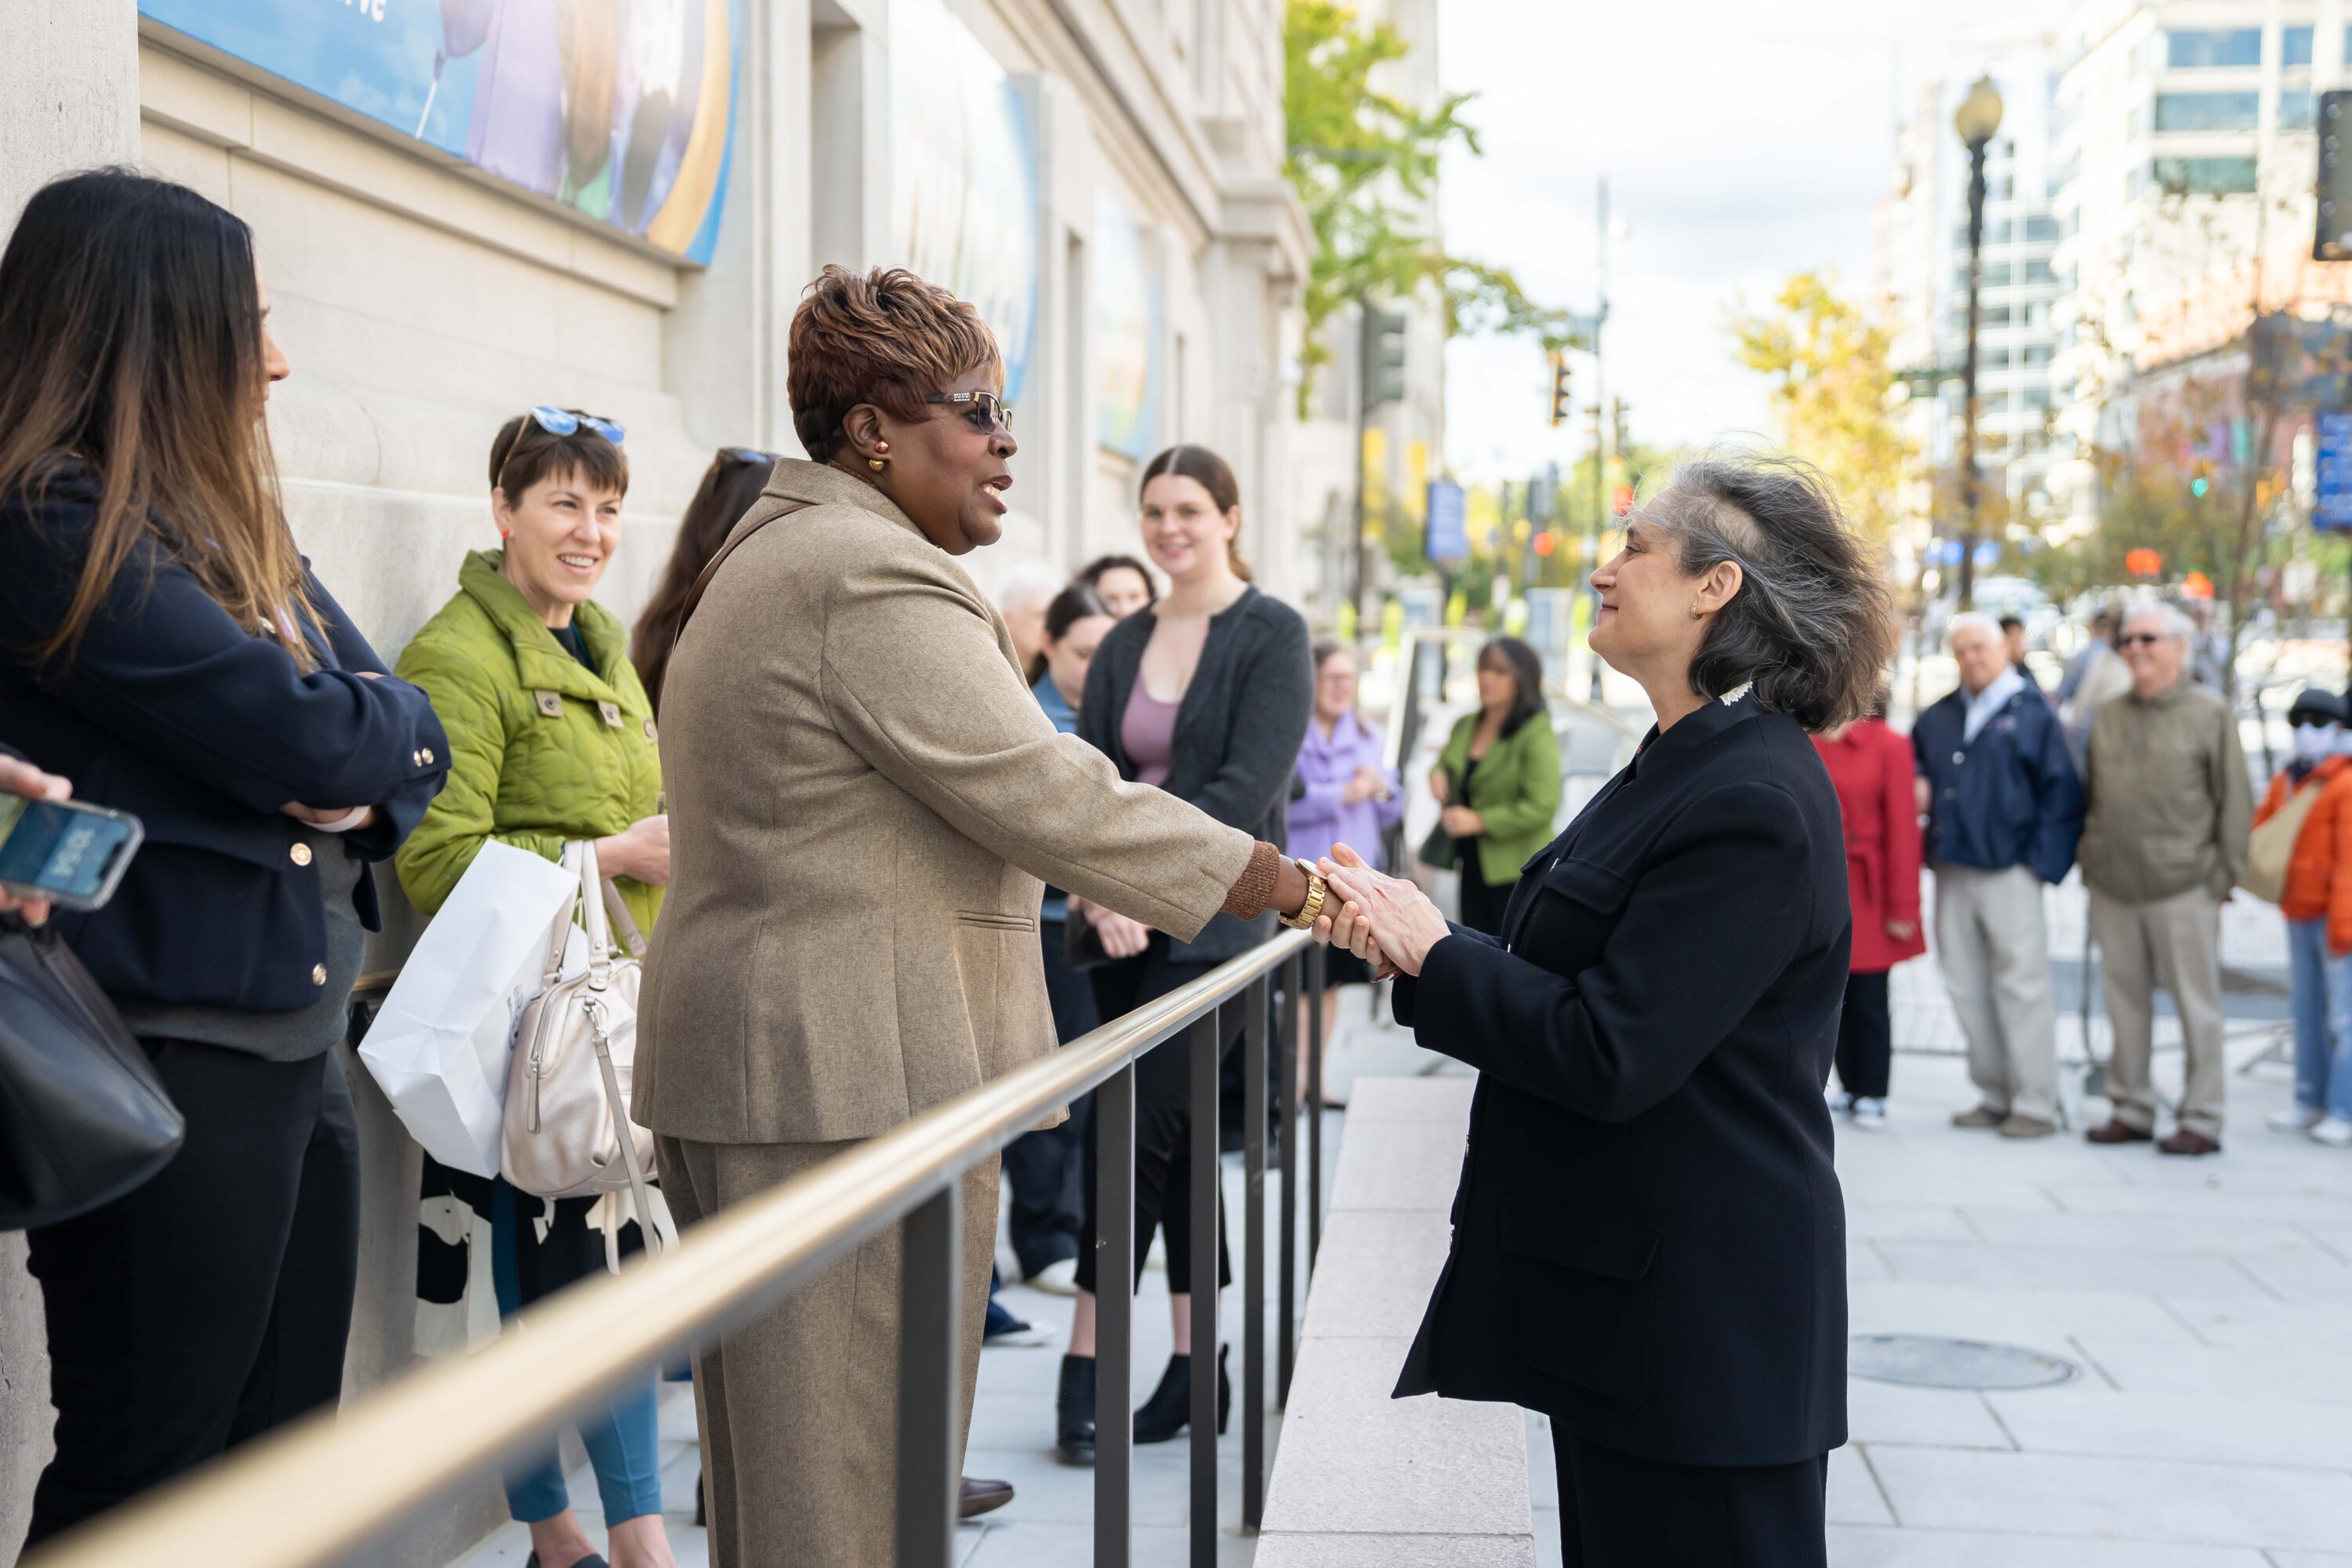 A group of people are standing in line outside of a building. A woman with a light skin tone and gray hair is shaking the hands of a woman standing in line. The woman standing in line has a dark skin tone and is wearing a beige suit.